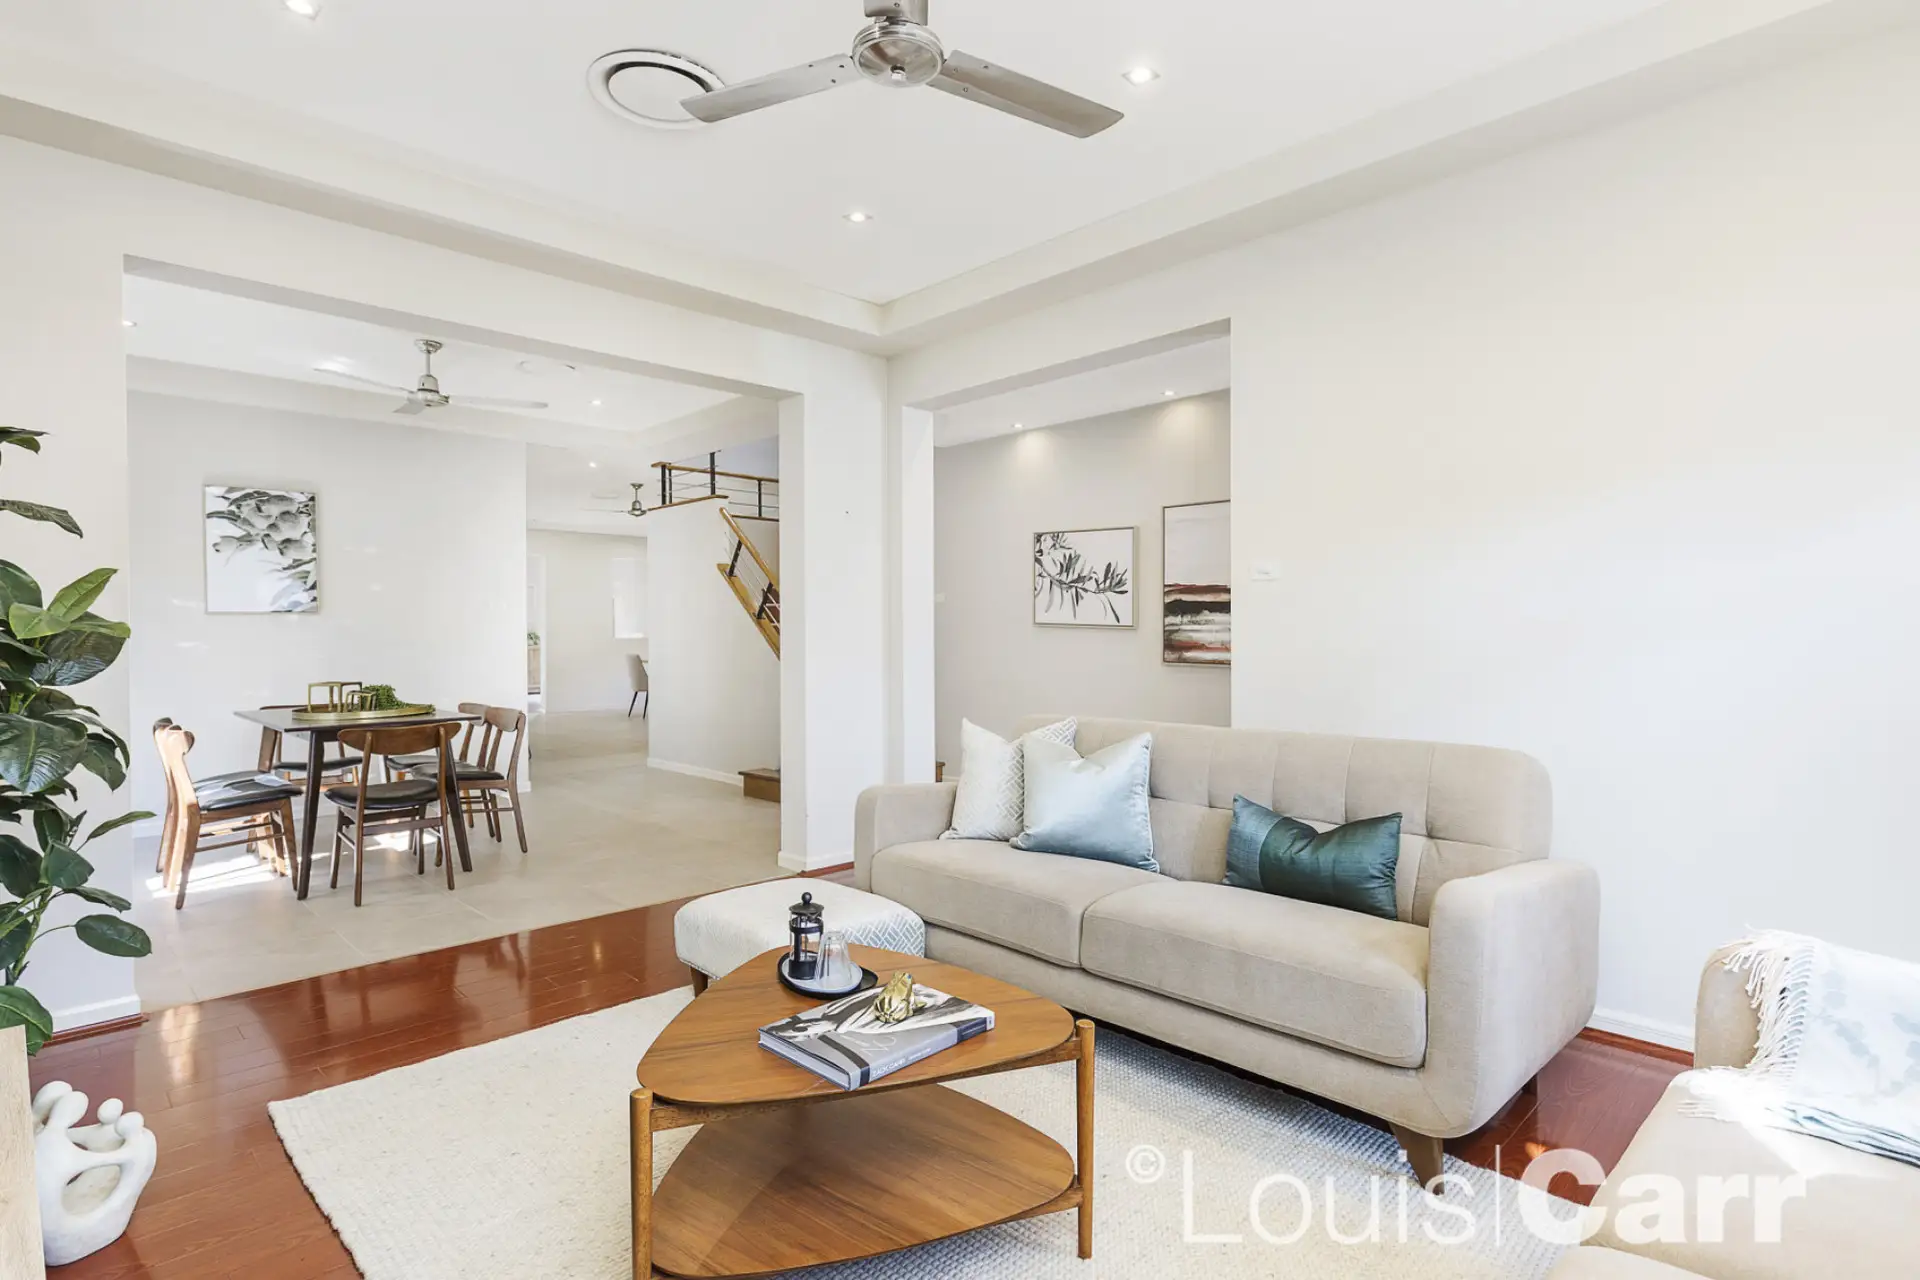 Photo #4: 15 Bellcast Road, Rouse Hill - Sold by Louis Carr Real Estate